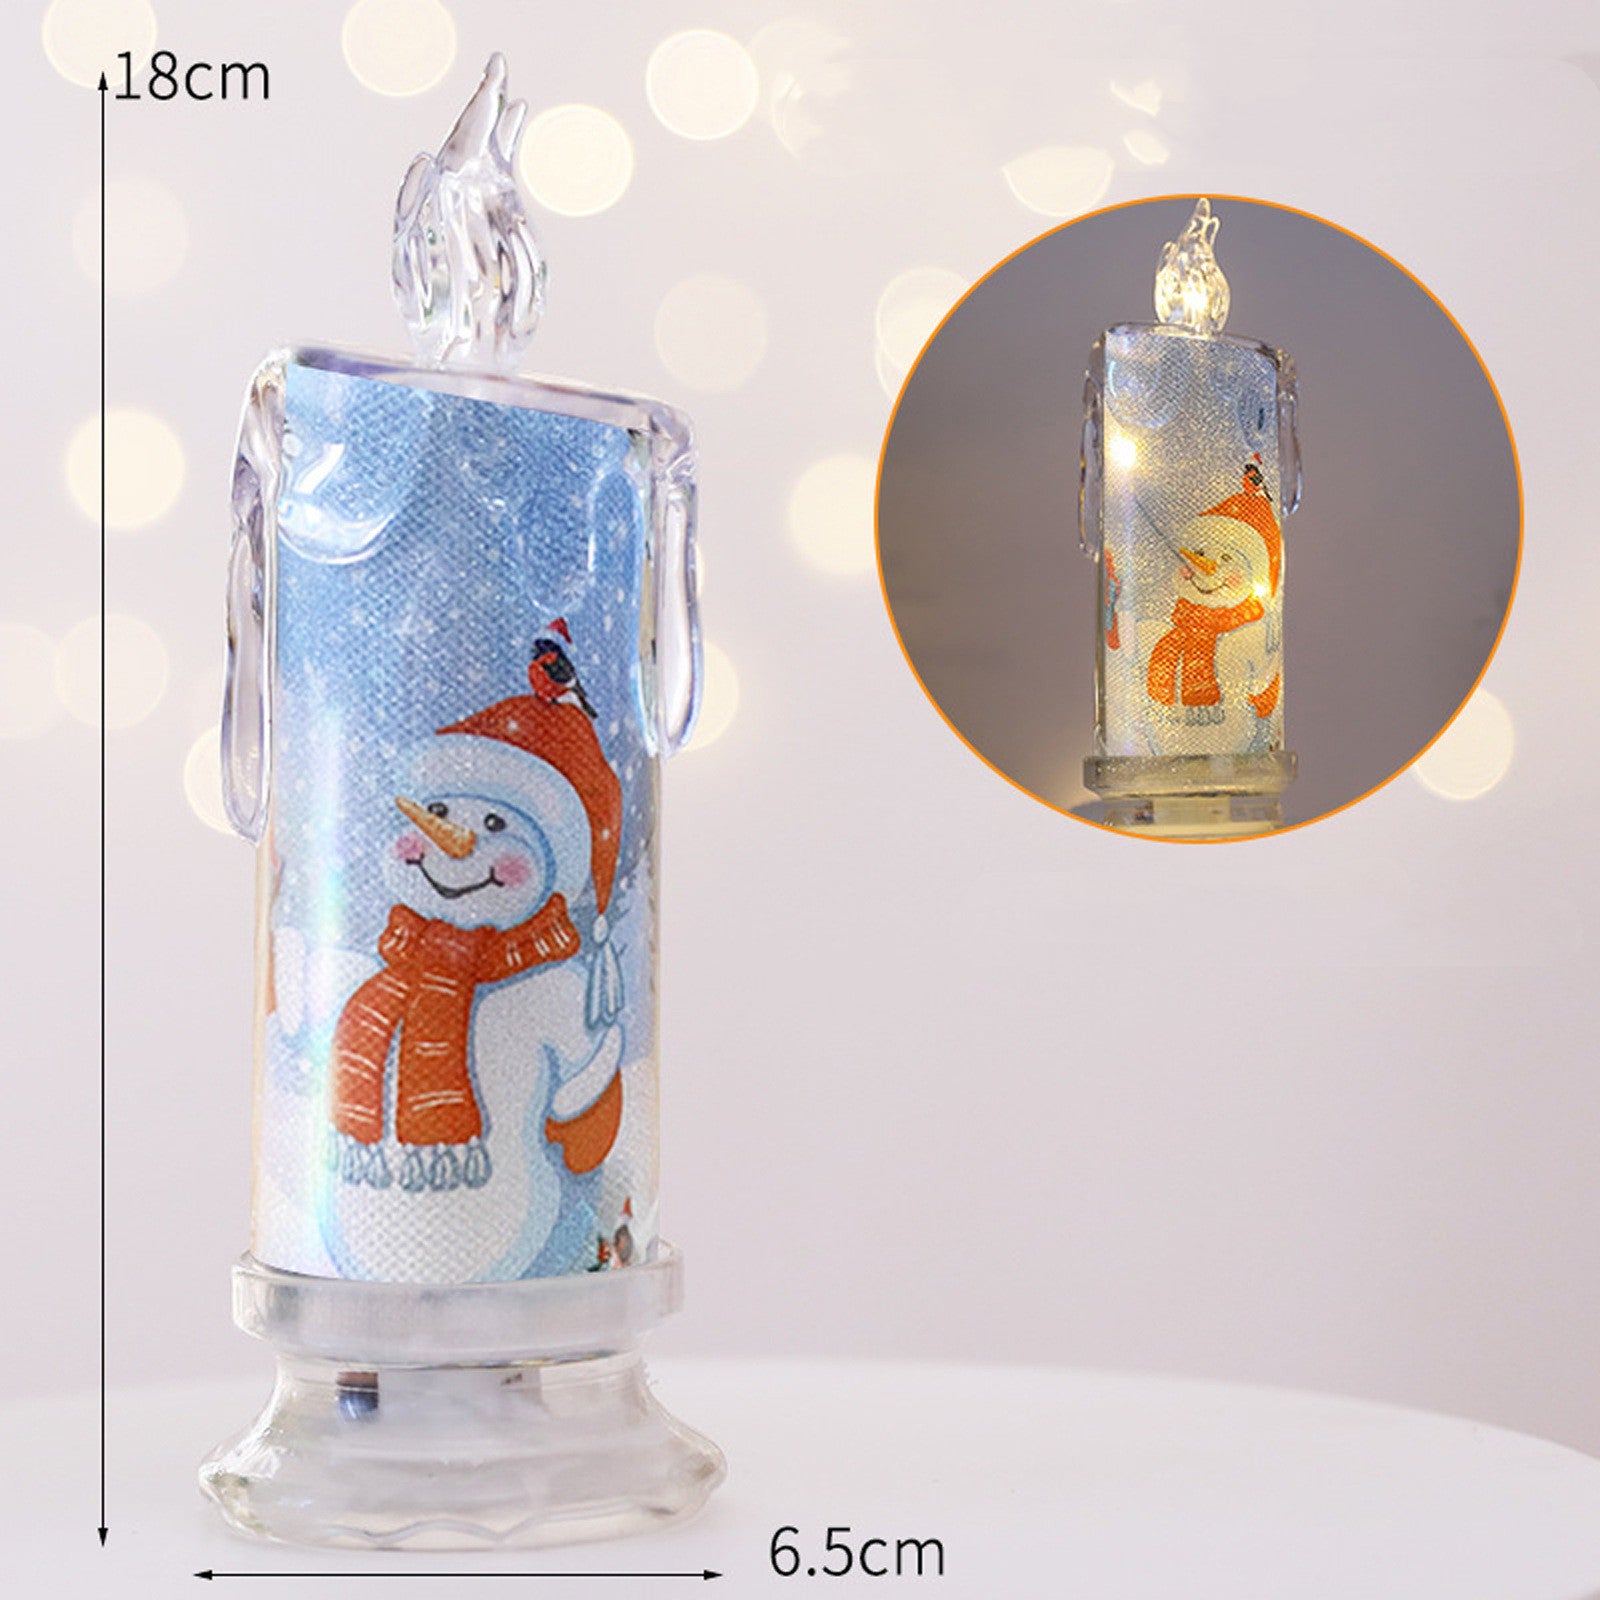 Christmas Transparent Electronic Candles Decorative Gifts, Christmas candles, window candles, advent candles, Christmas candle holder, Christmas window candles, Christmas tree candles, Christmas wax melts, Christmas scented candles and electric window candles.